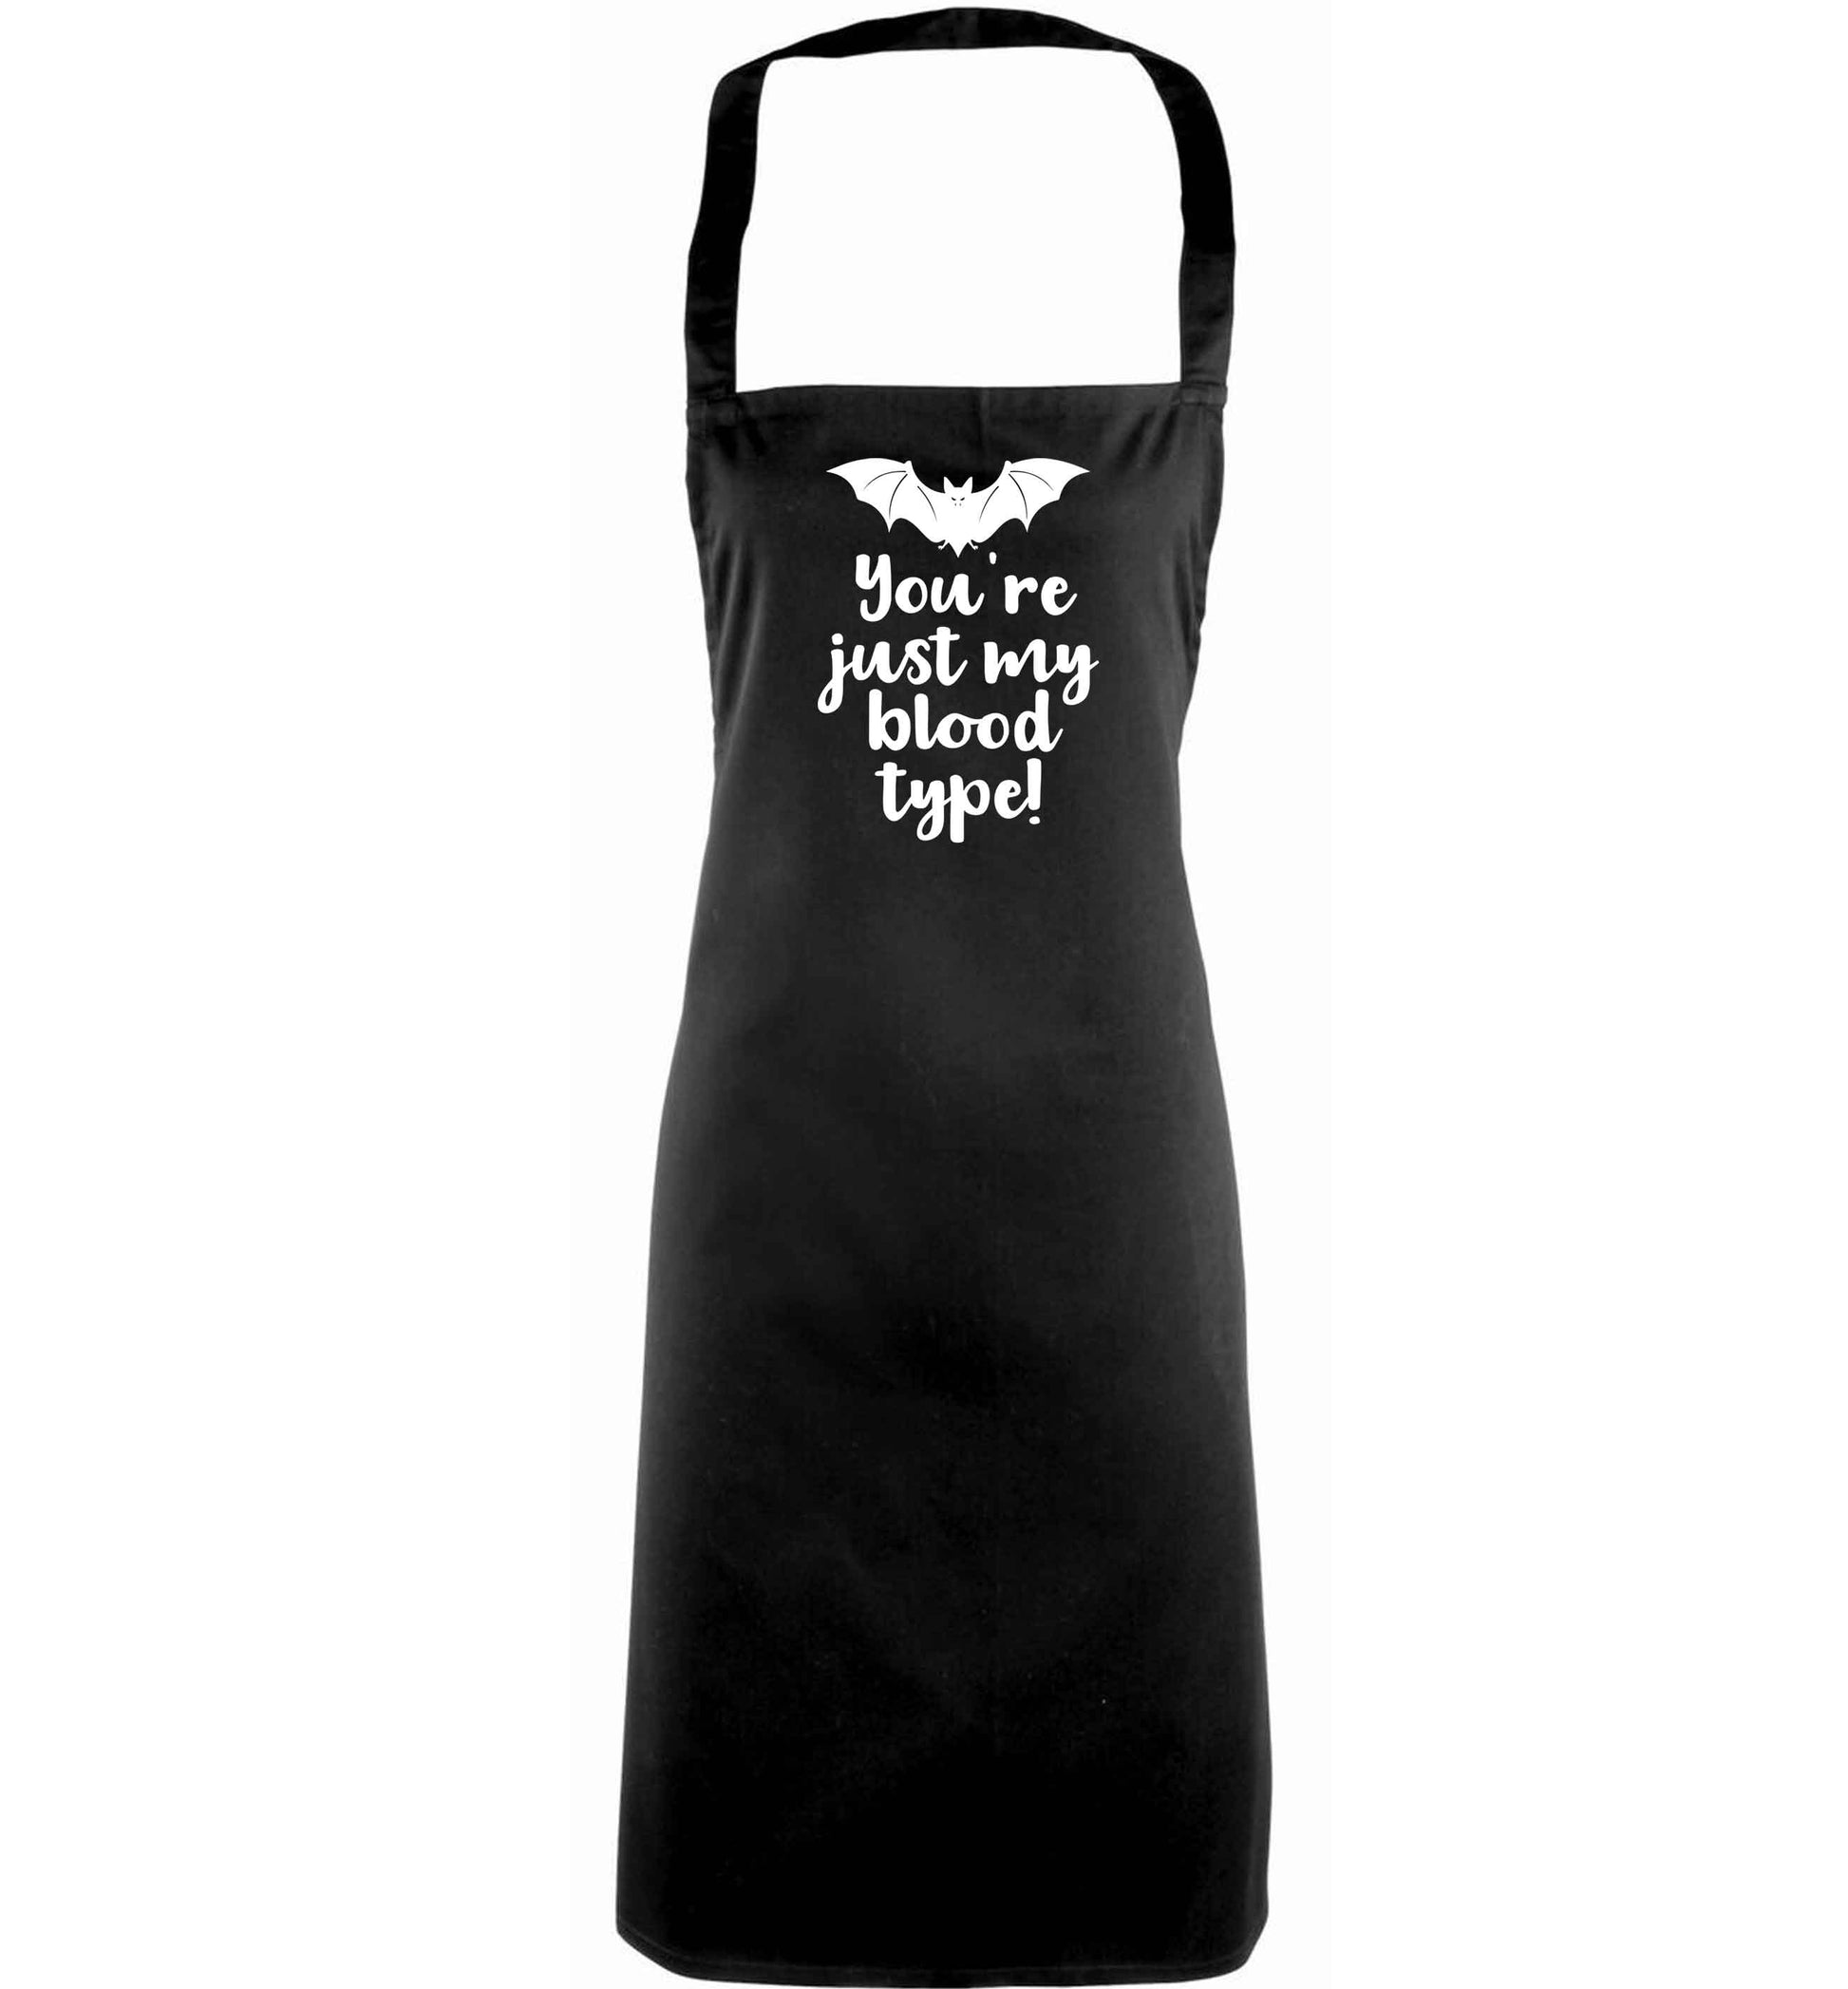 You're just my blood type adults black apron